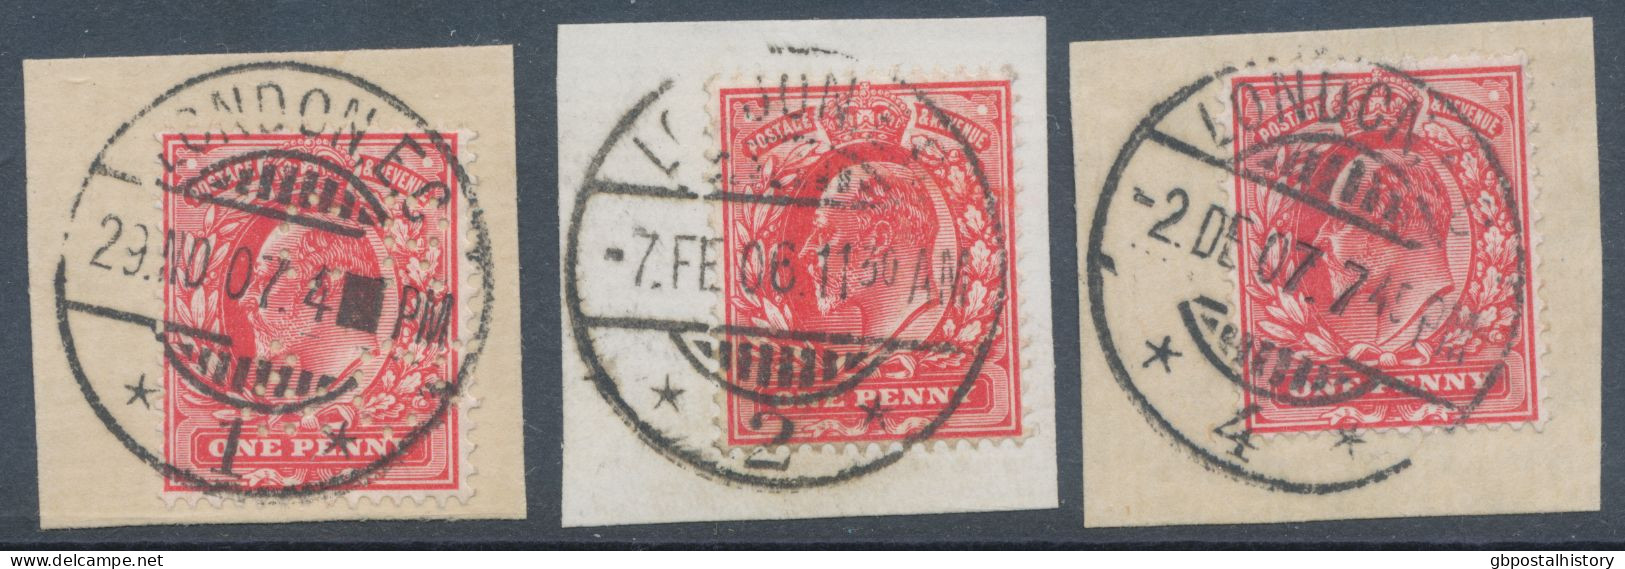 GB EXPERIMENTAL POSTMARKS Extremely Rare CDS Double Circle – Continental Type ('Hammer') An Experimental Type Based On - Used Stamps